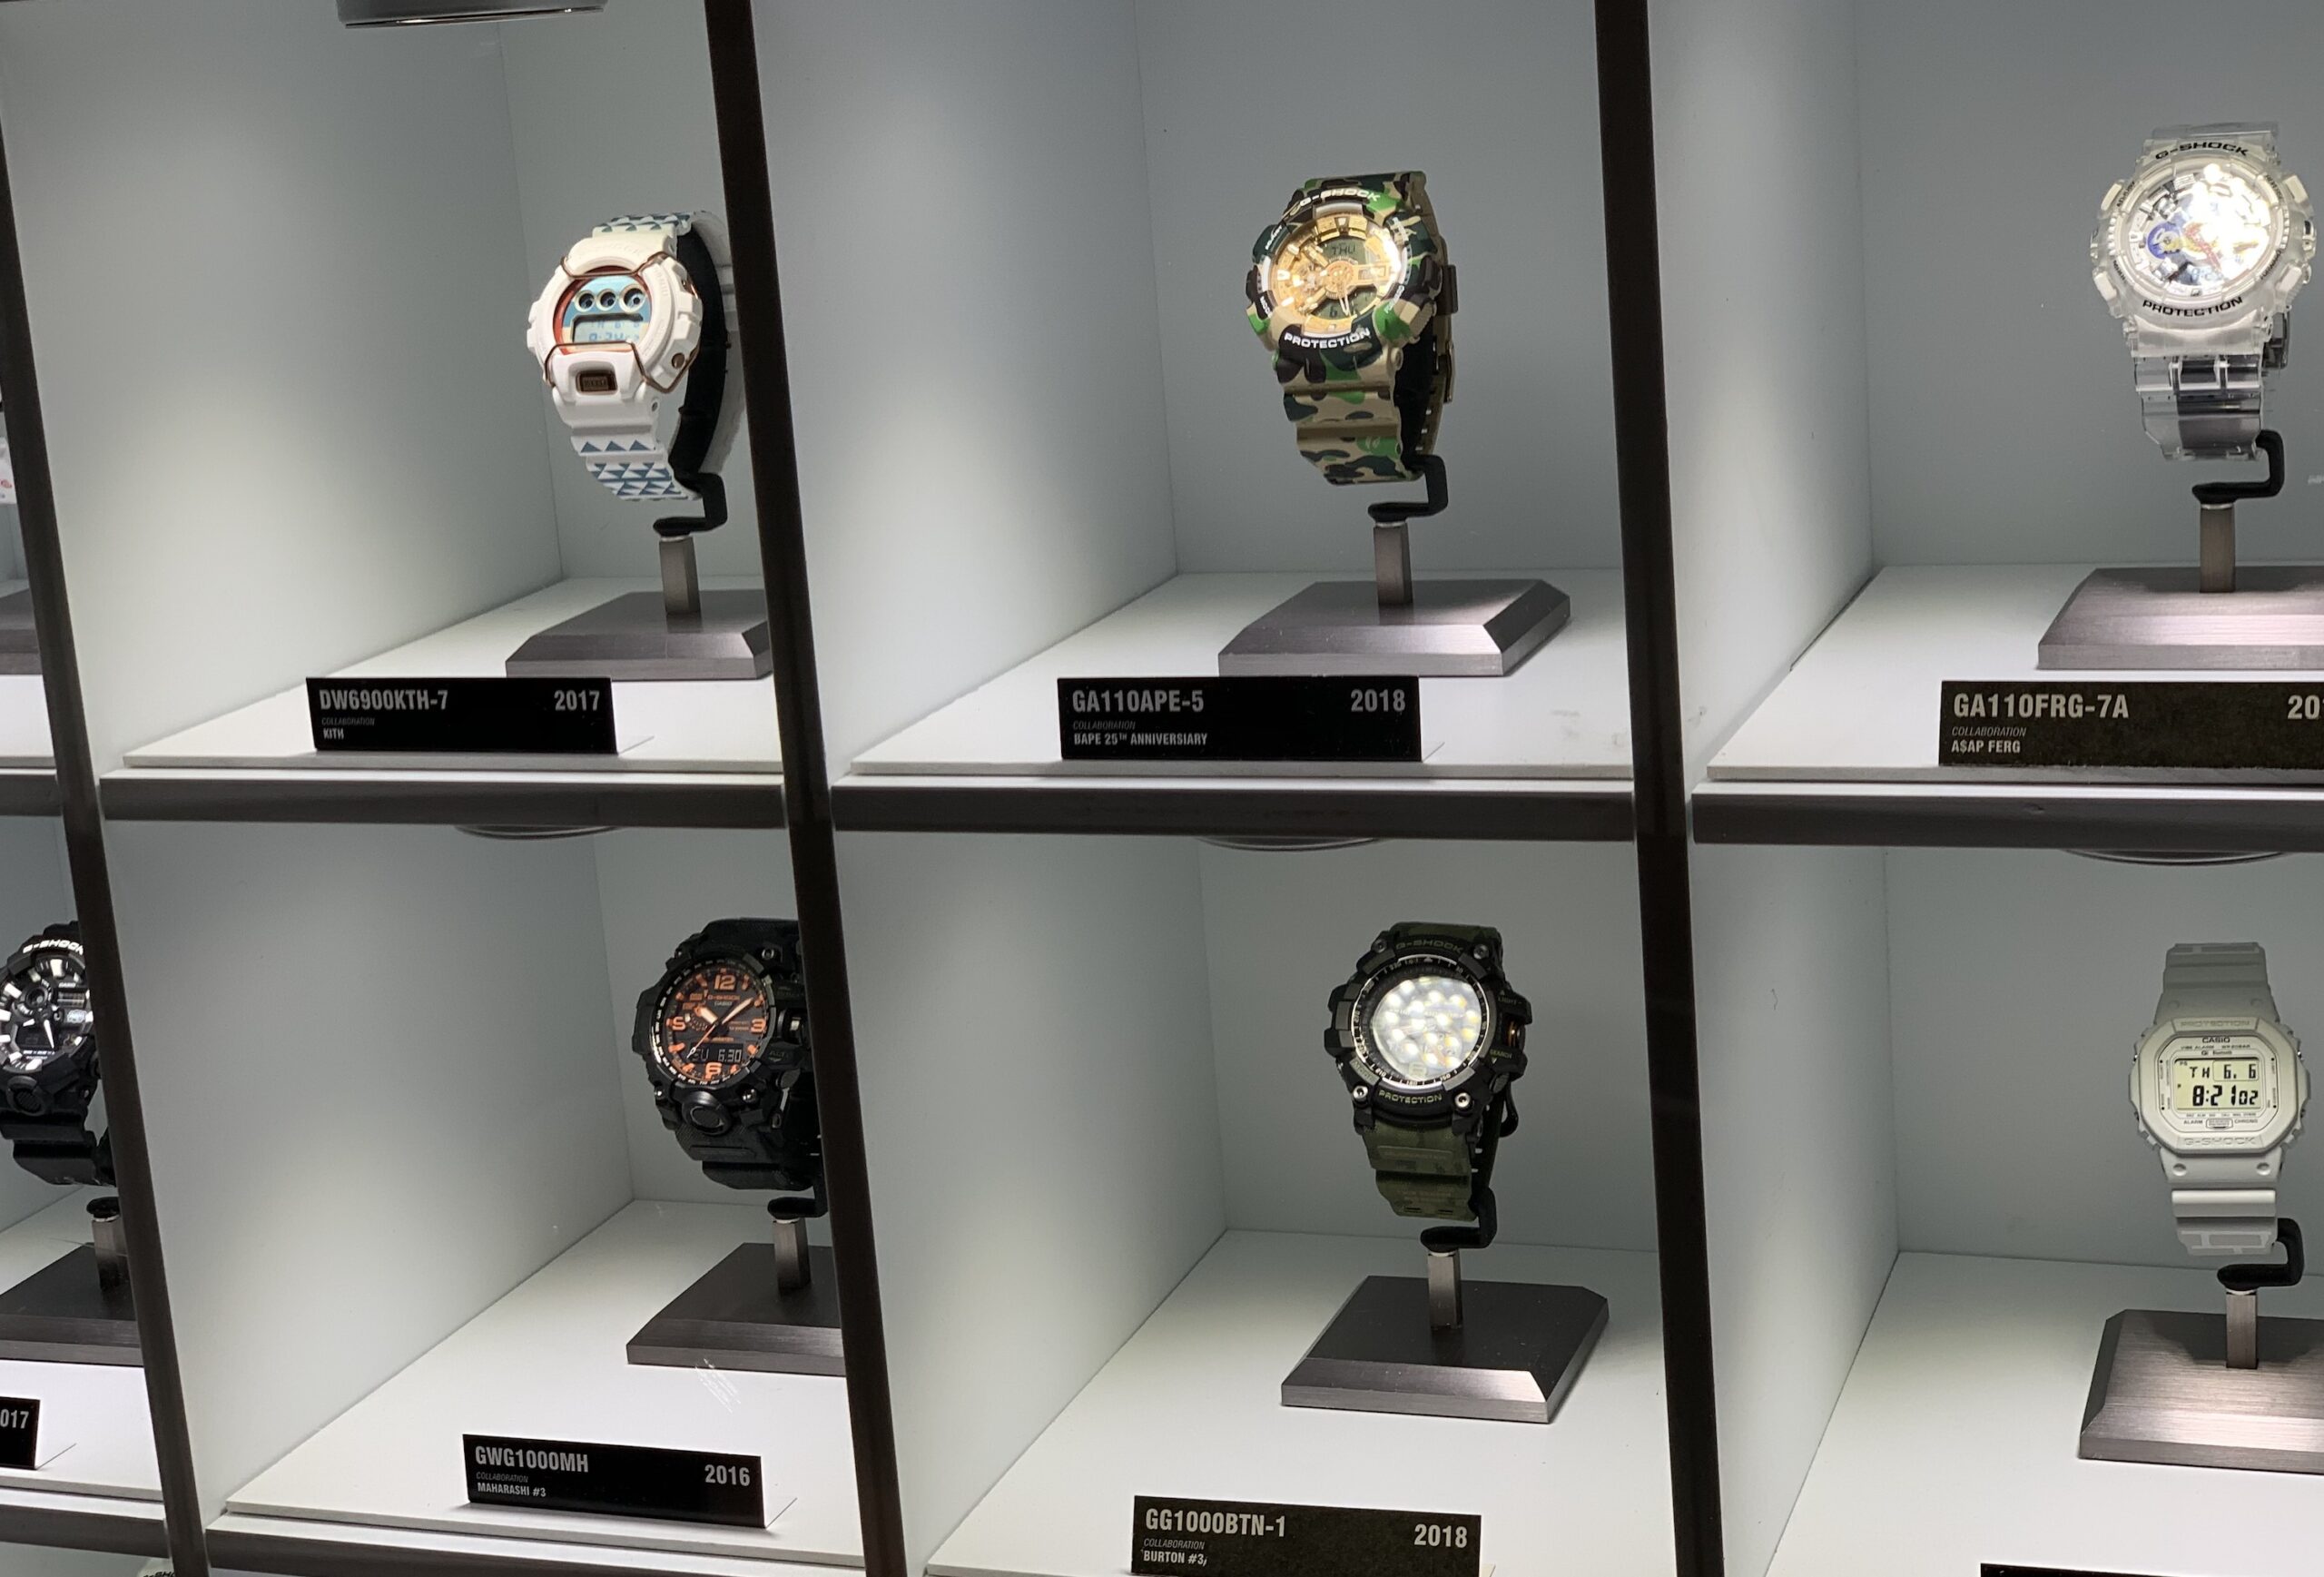 G-Shock watches from over the years